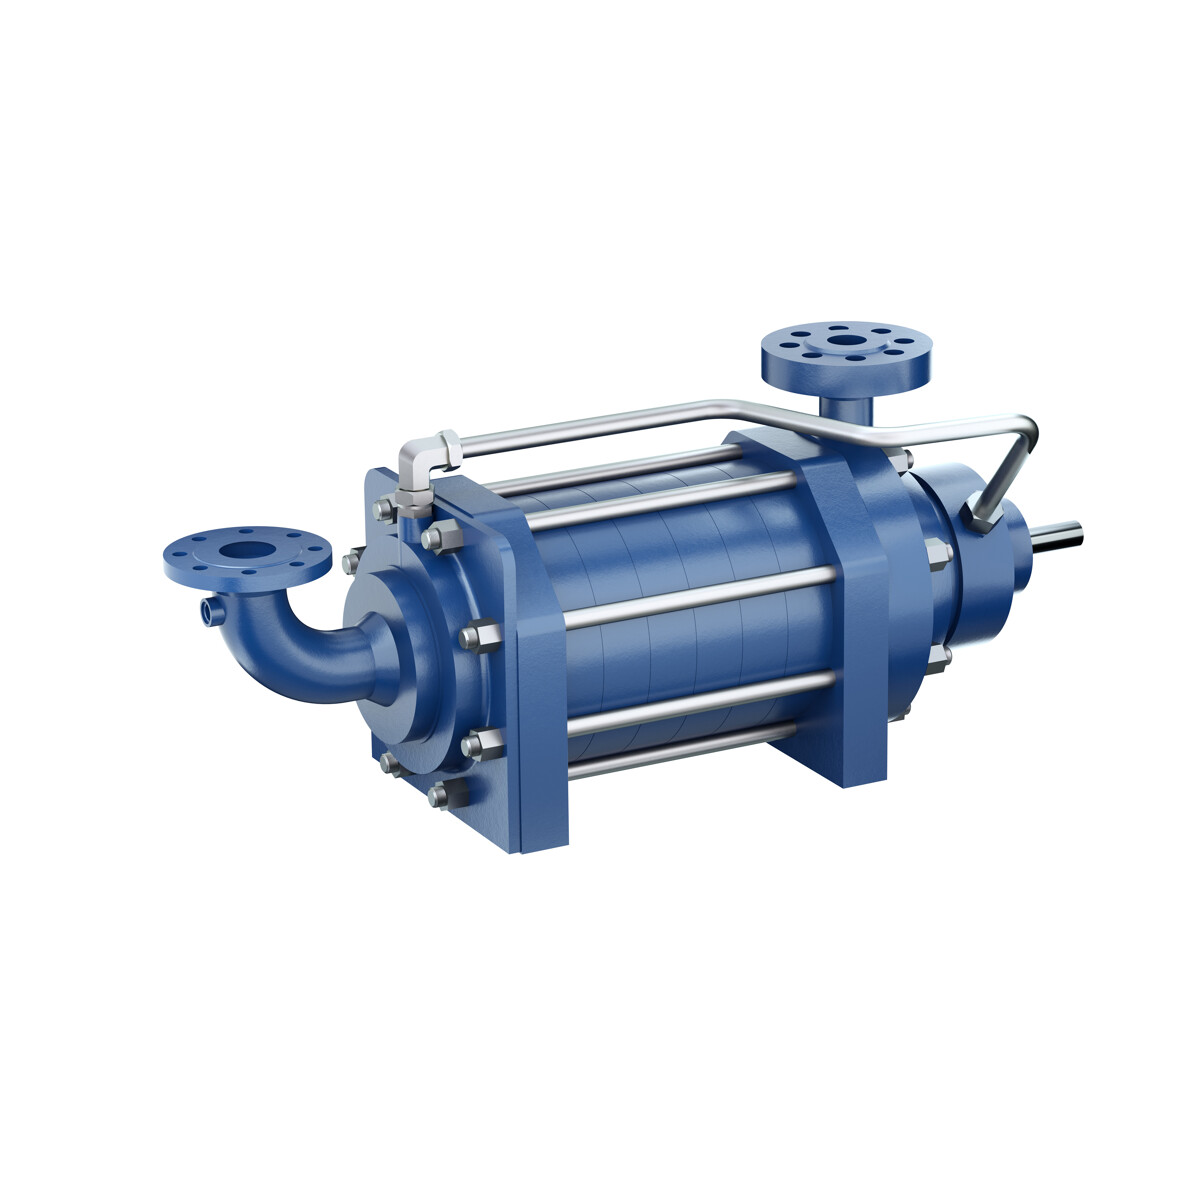 The new HGM-S – A new boiler feed pump for power stations fired by regenerative fuels